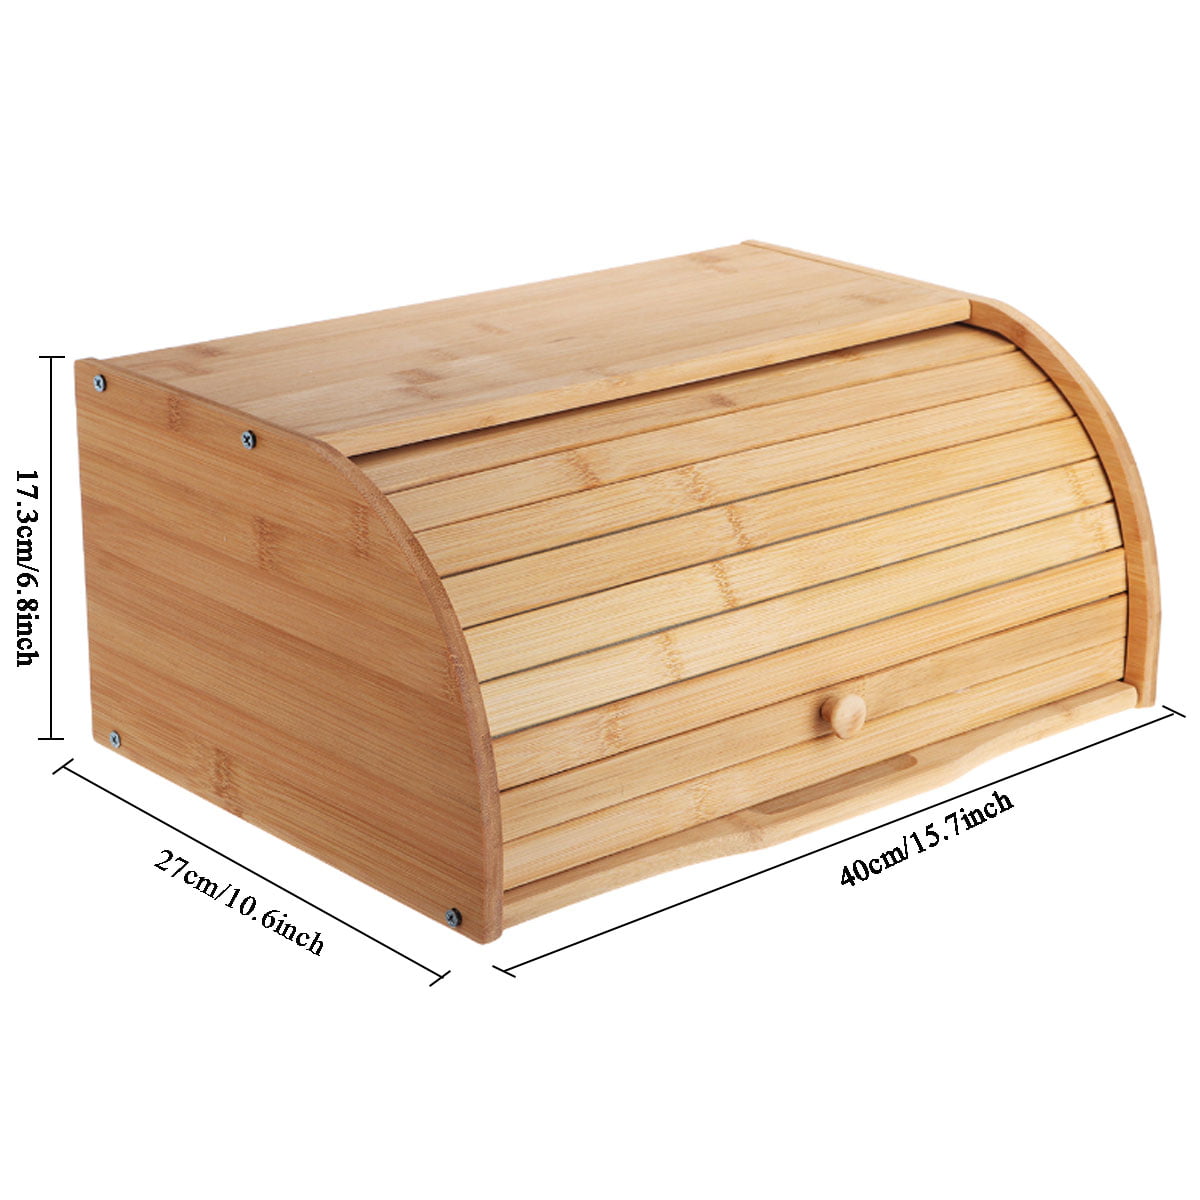 Wooden Bread Bin Roll Top for storing Loaf Small Red